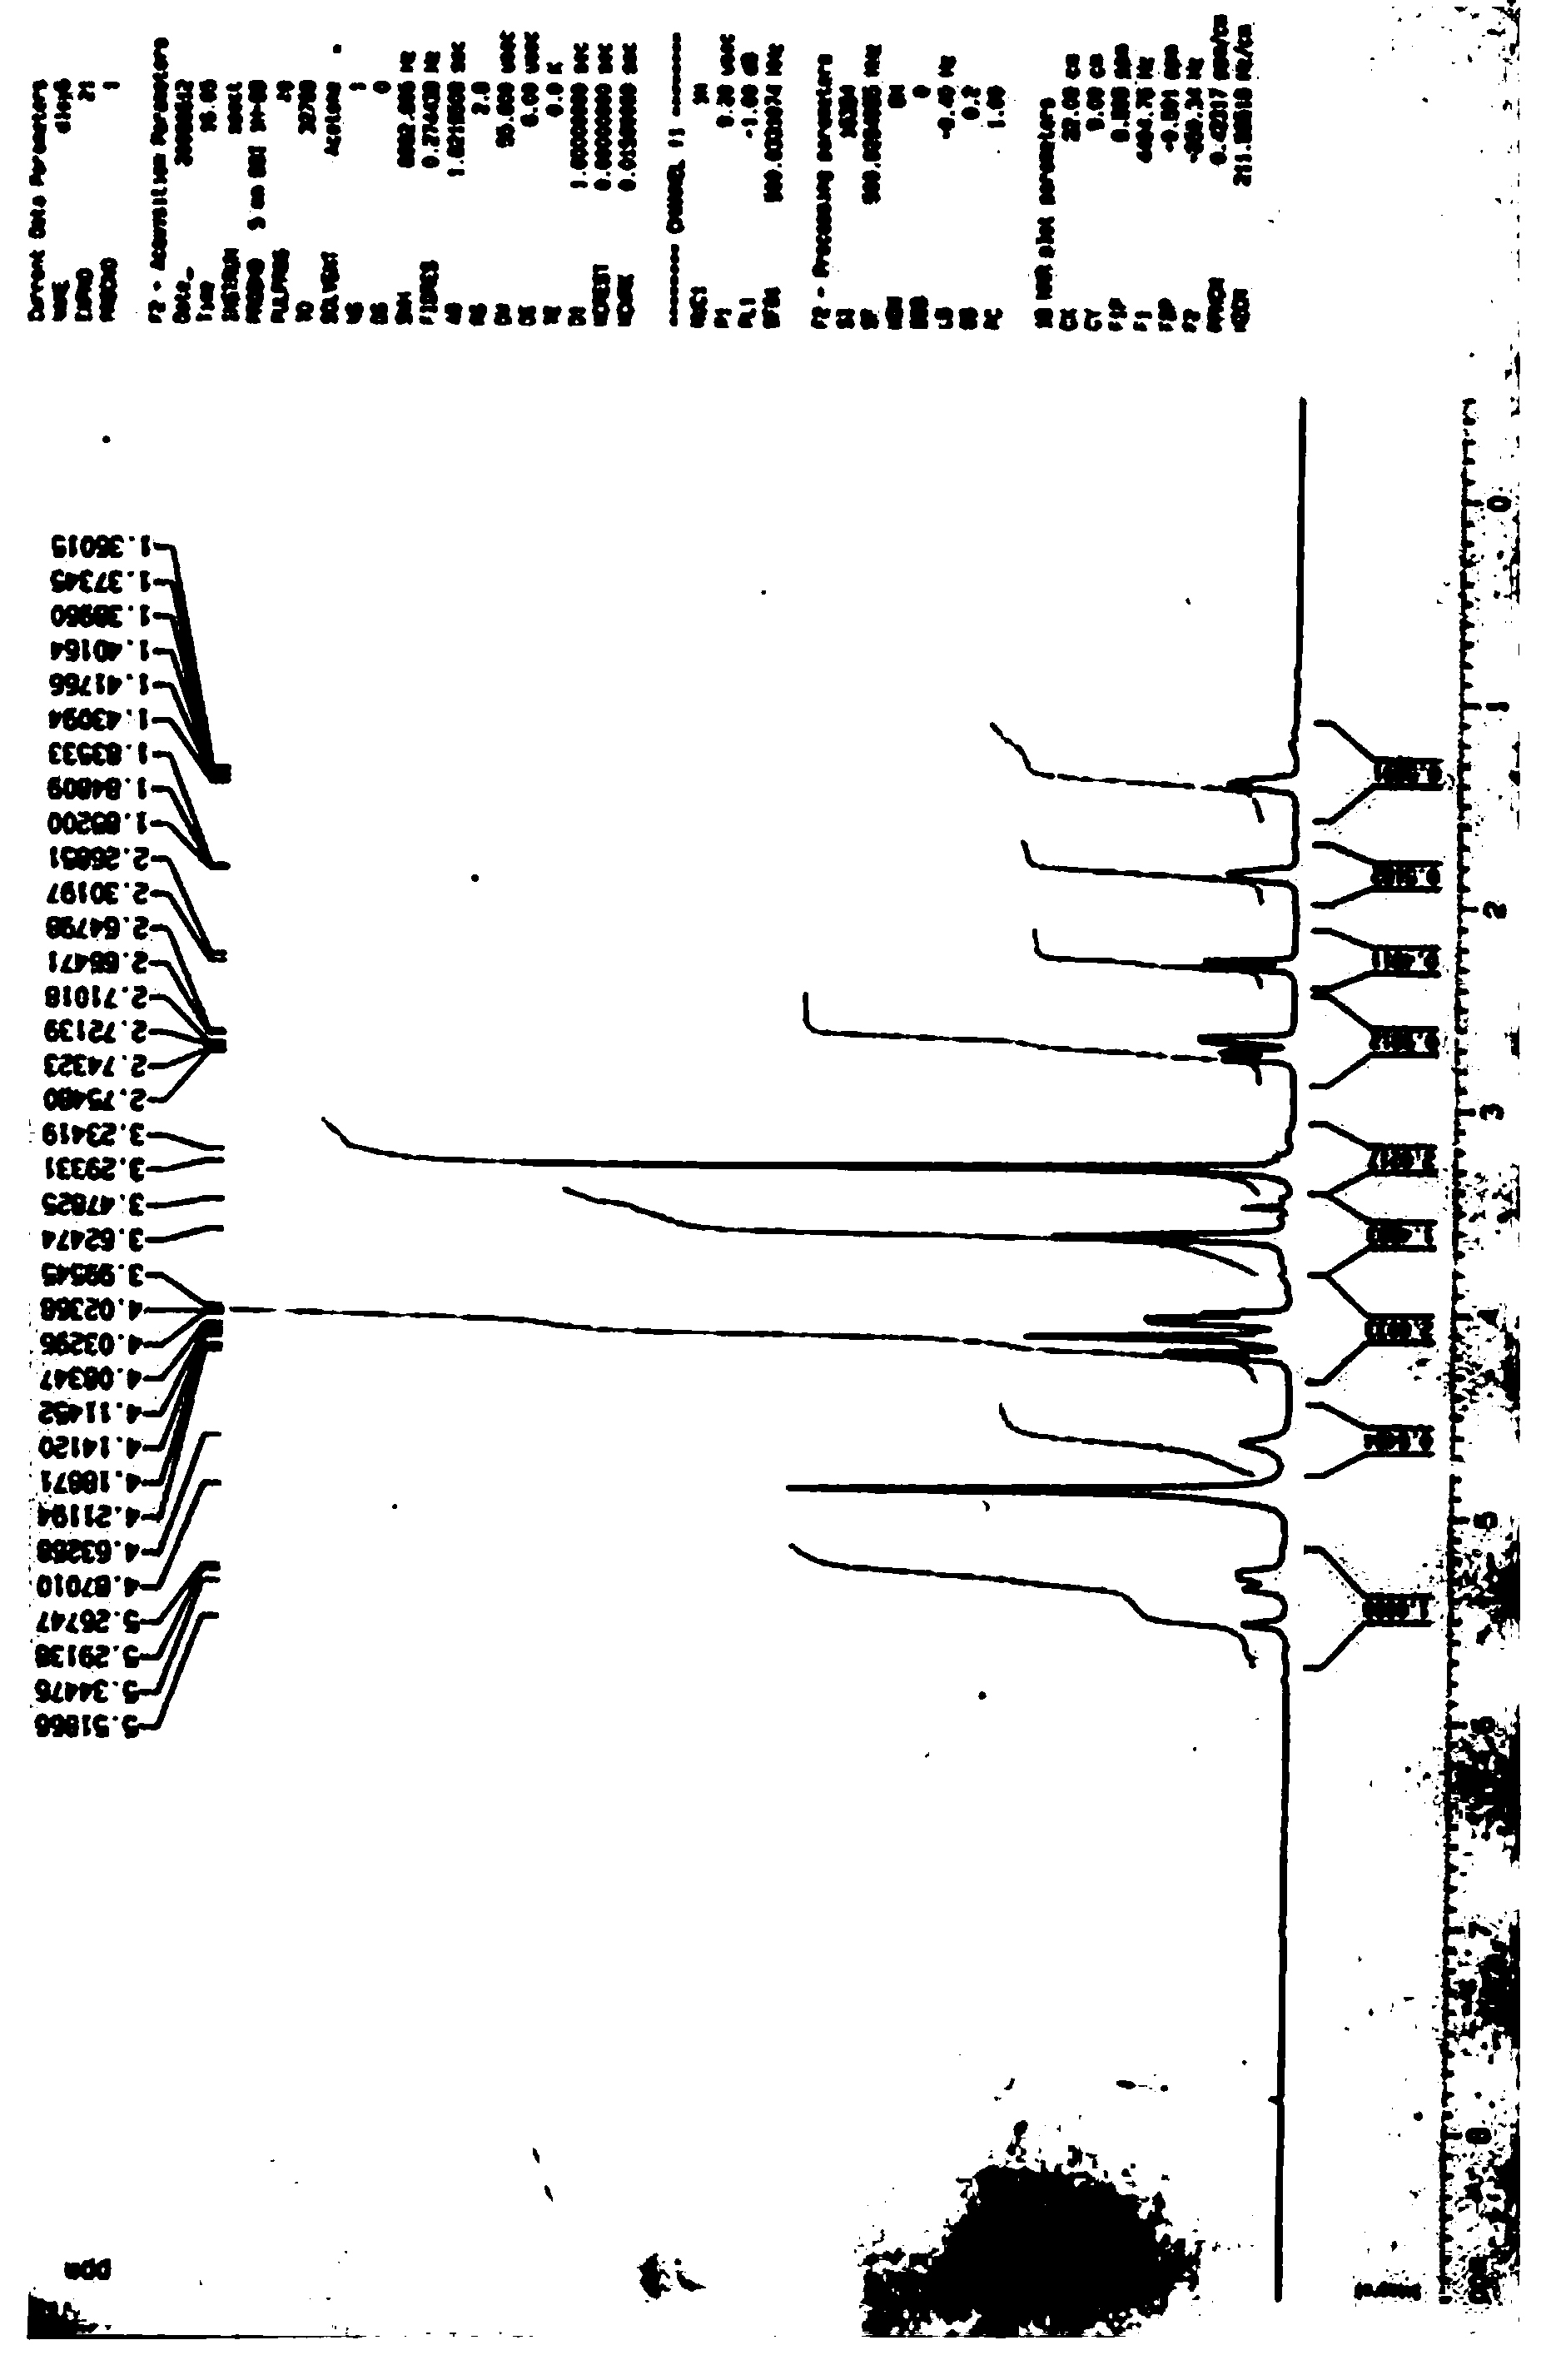 Eucommia active monomer compound as well as preparation method, pharmaceutical composition and application thereof